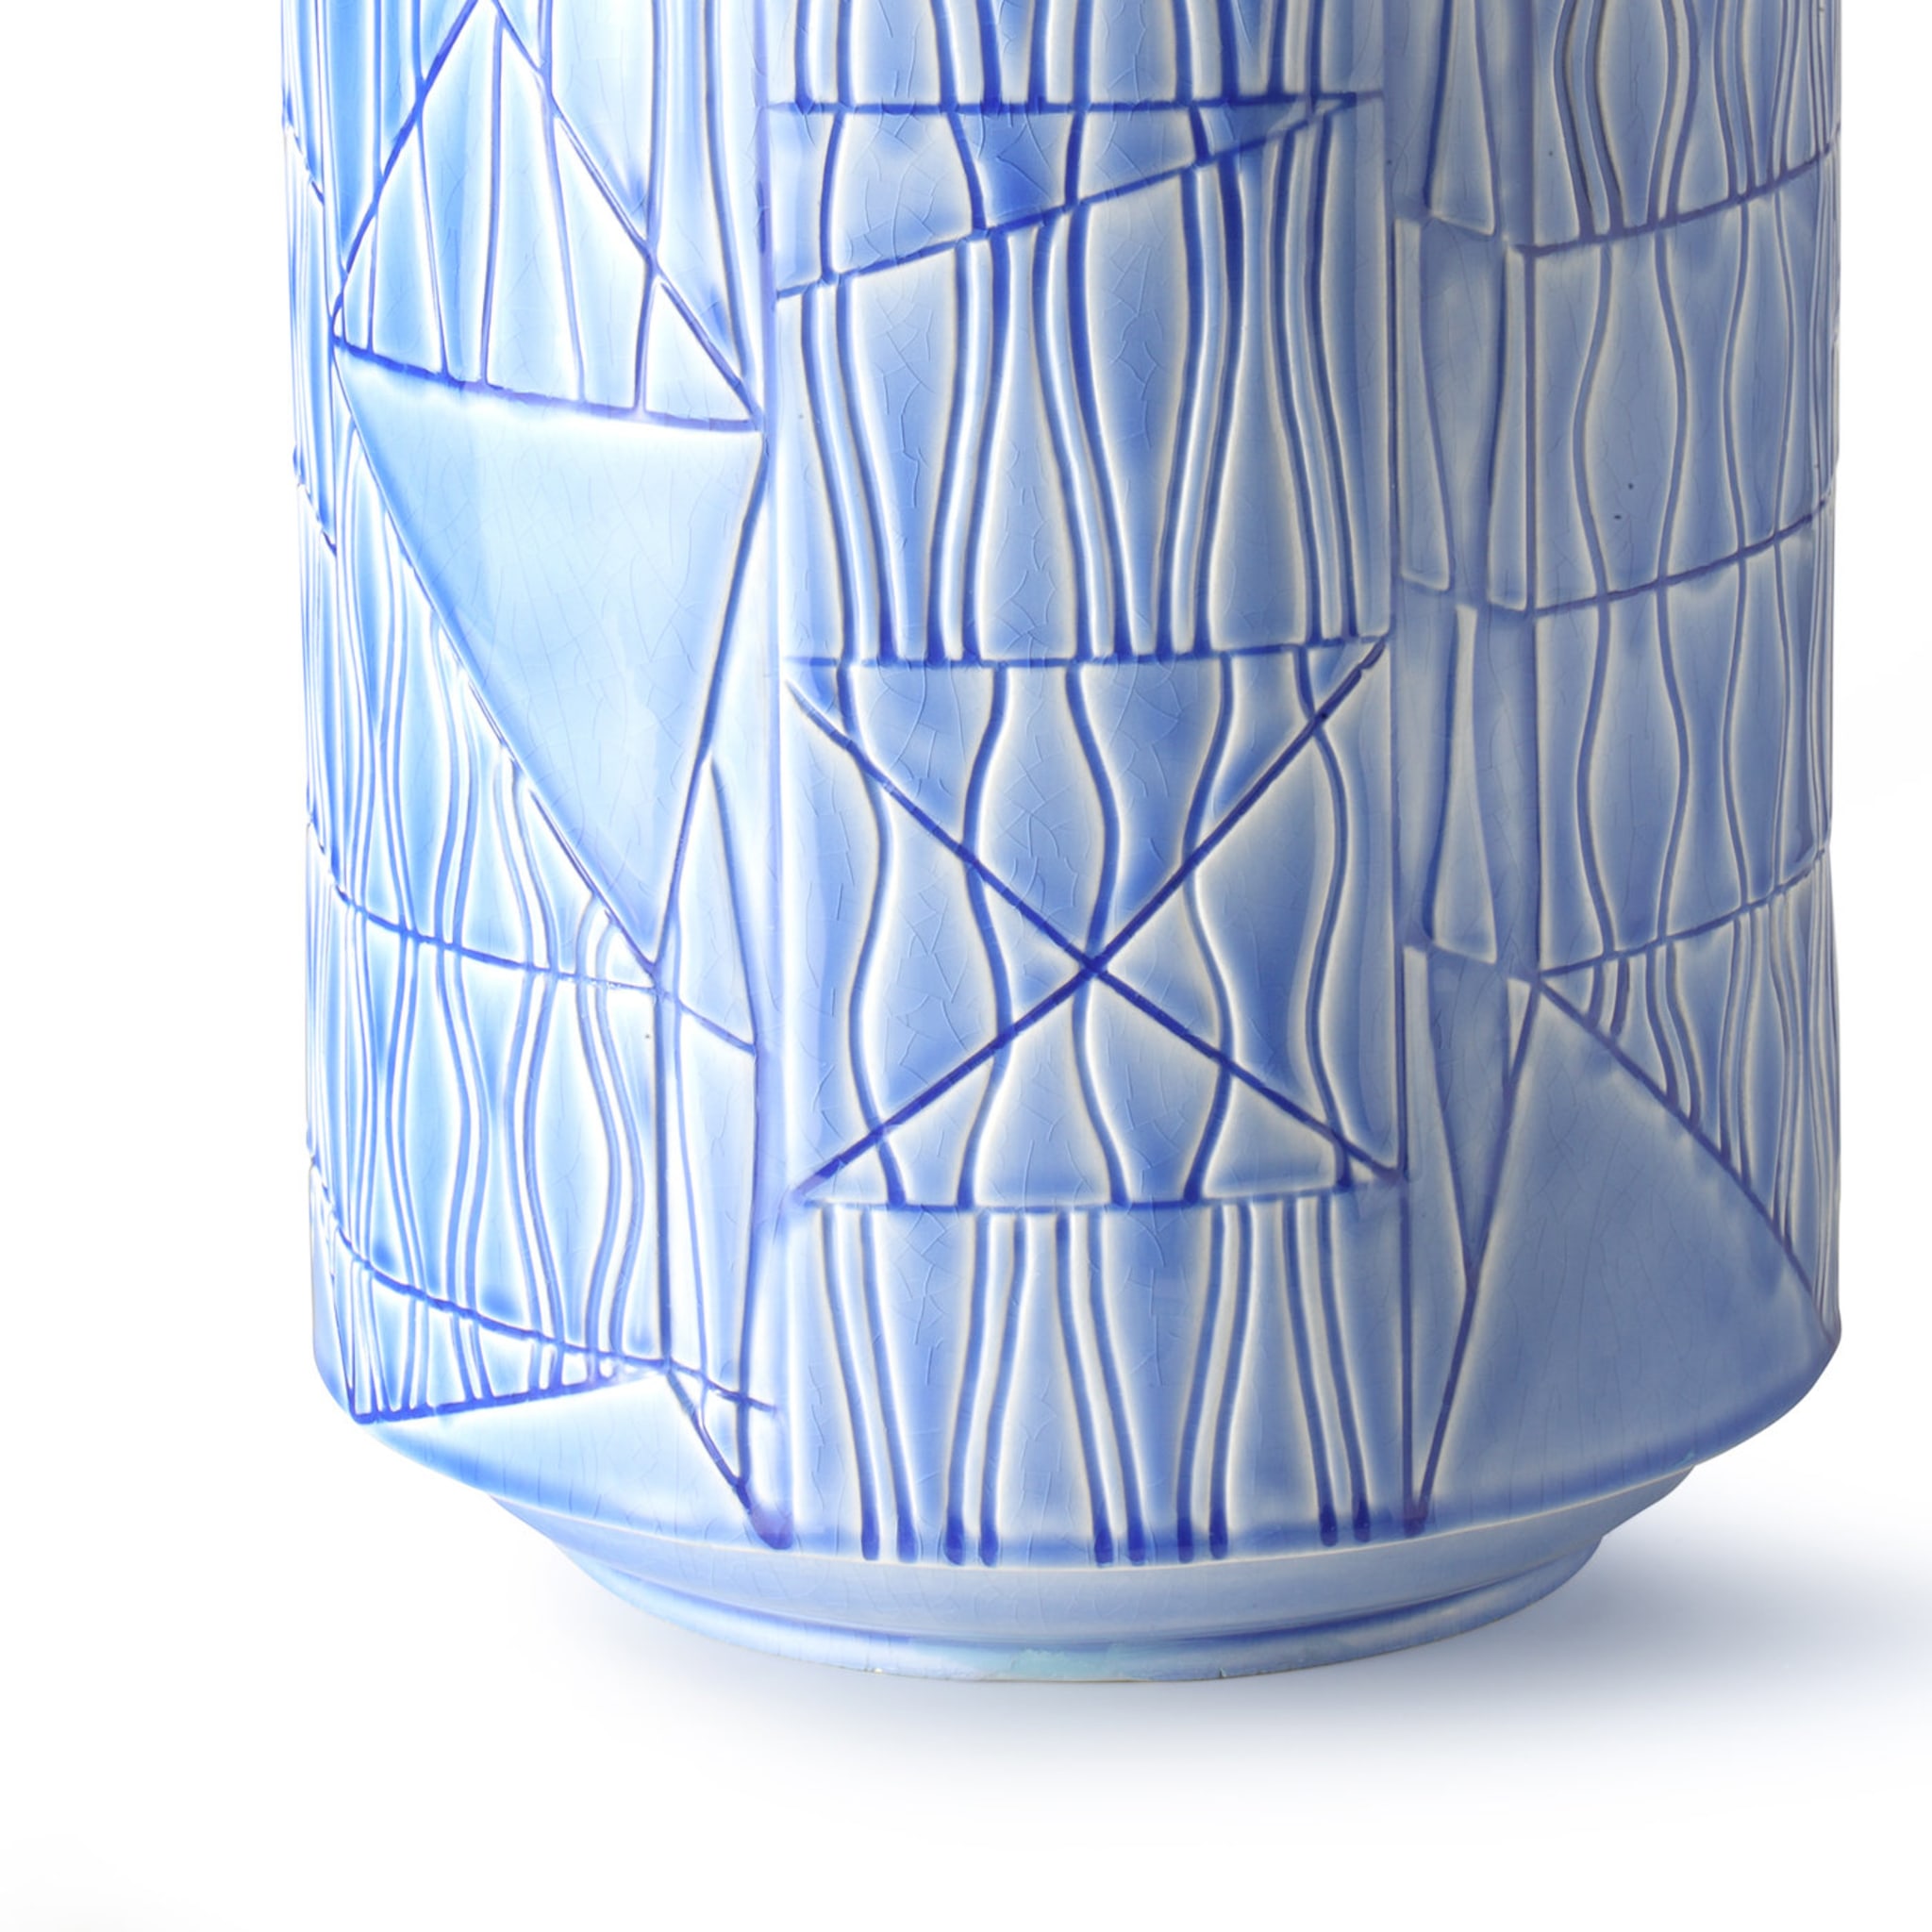 Pale Blue Vase by Bethan Laura Wood - Alternative view 2